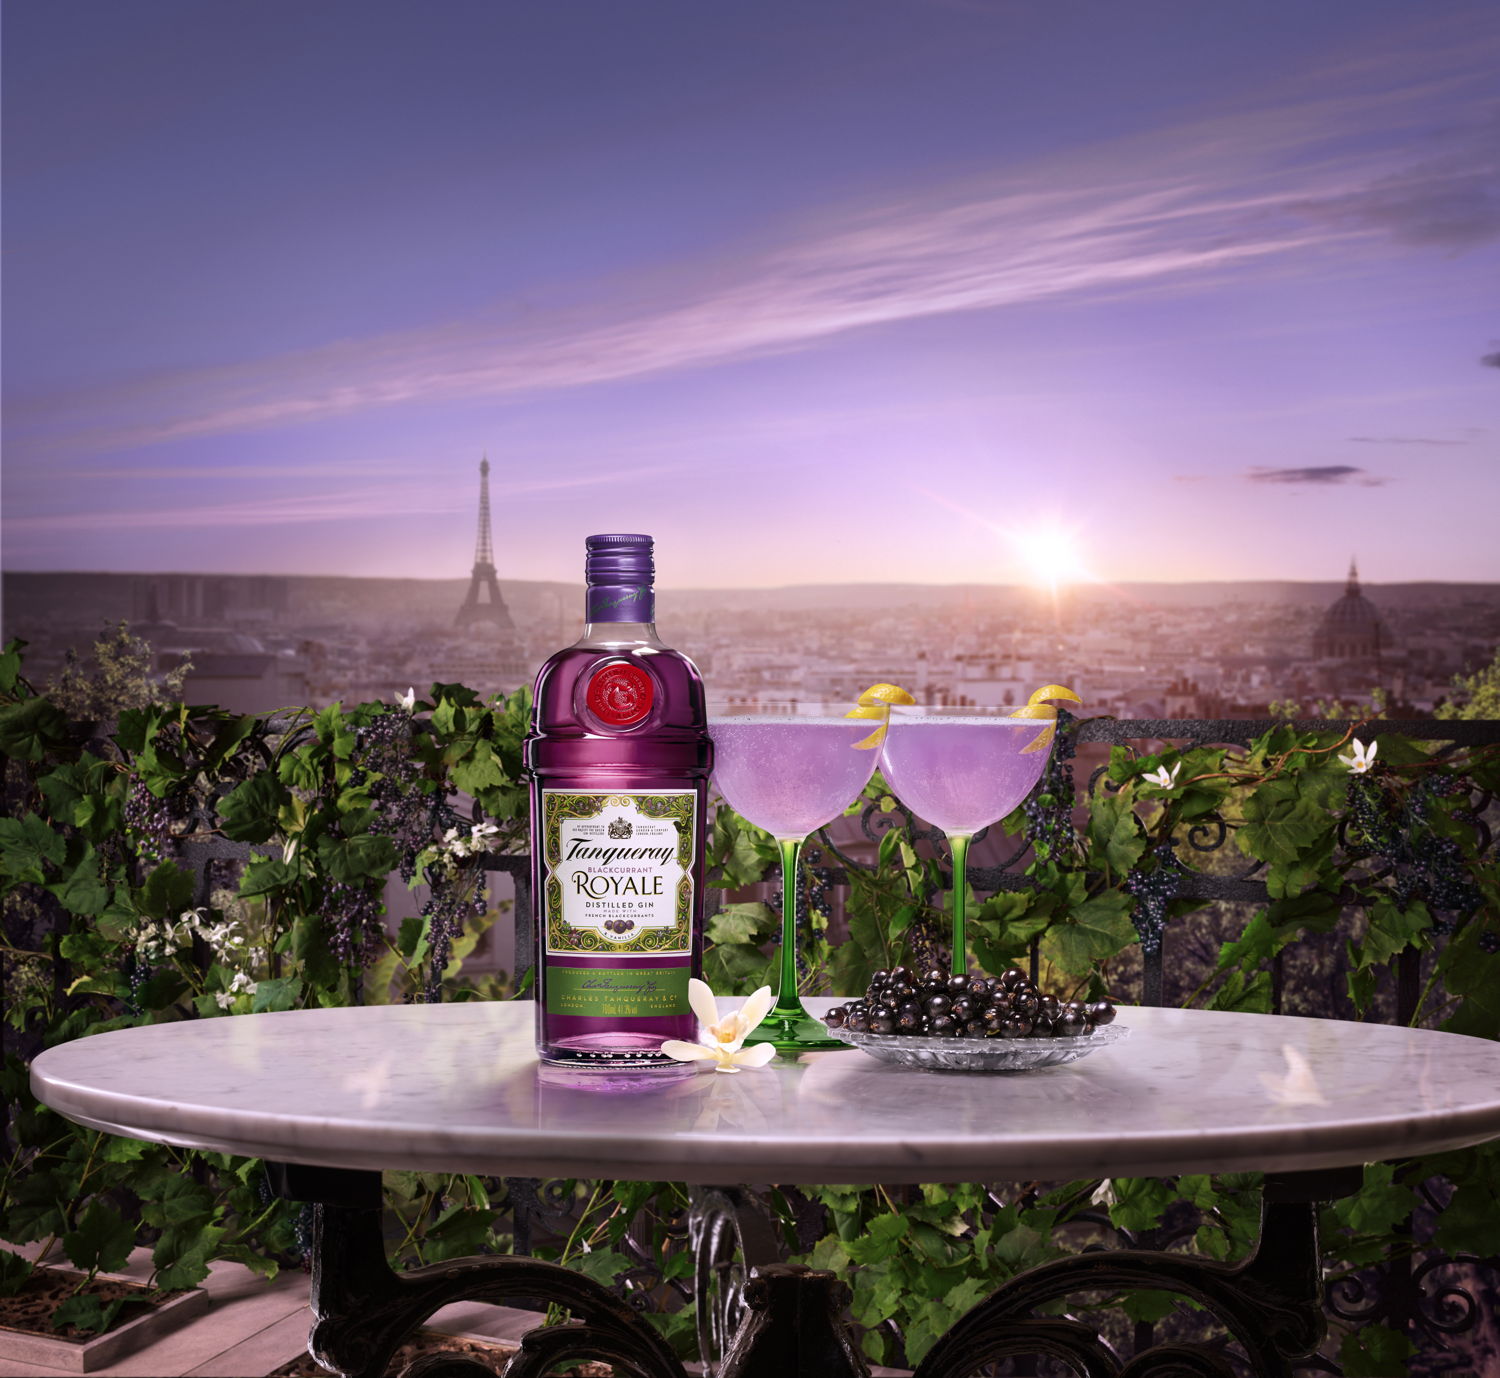 Tanqueray Blackcurrant Royale  70cl - French 75 - €34,95